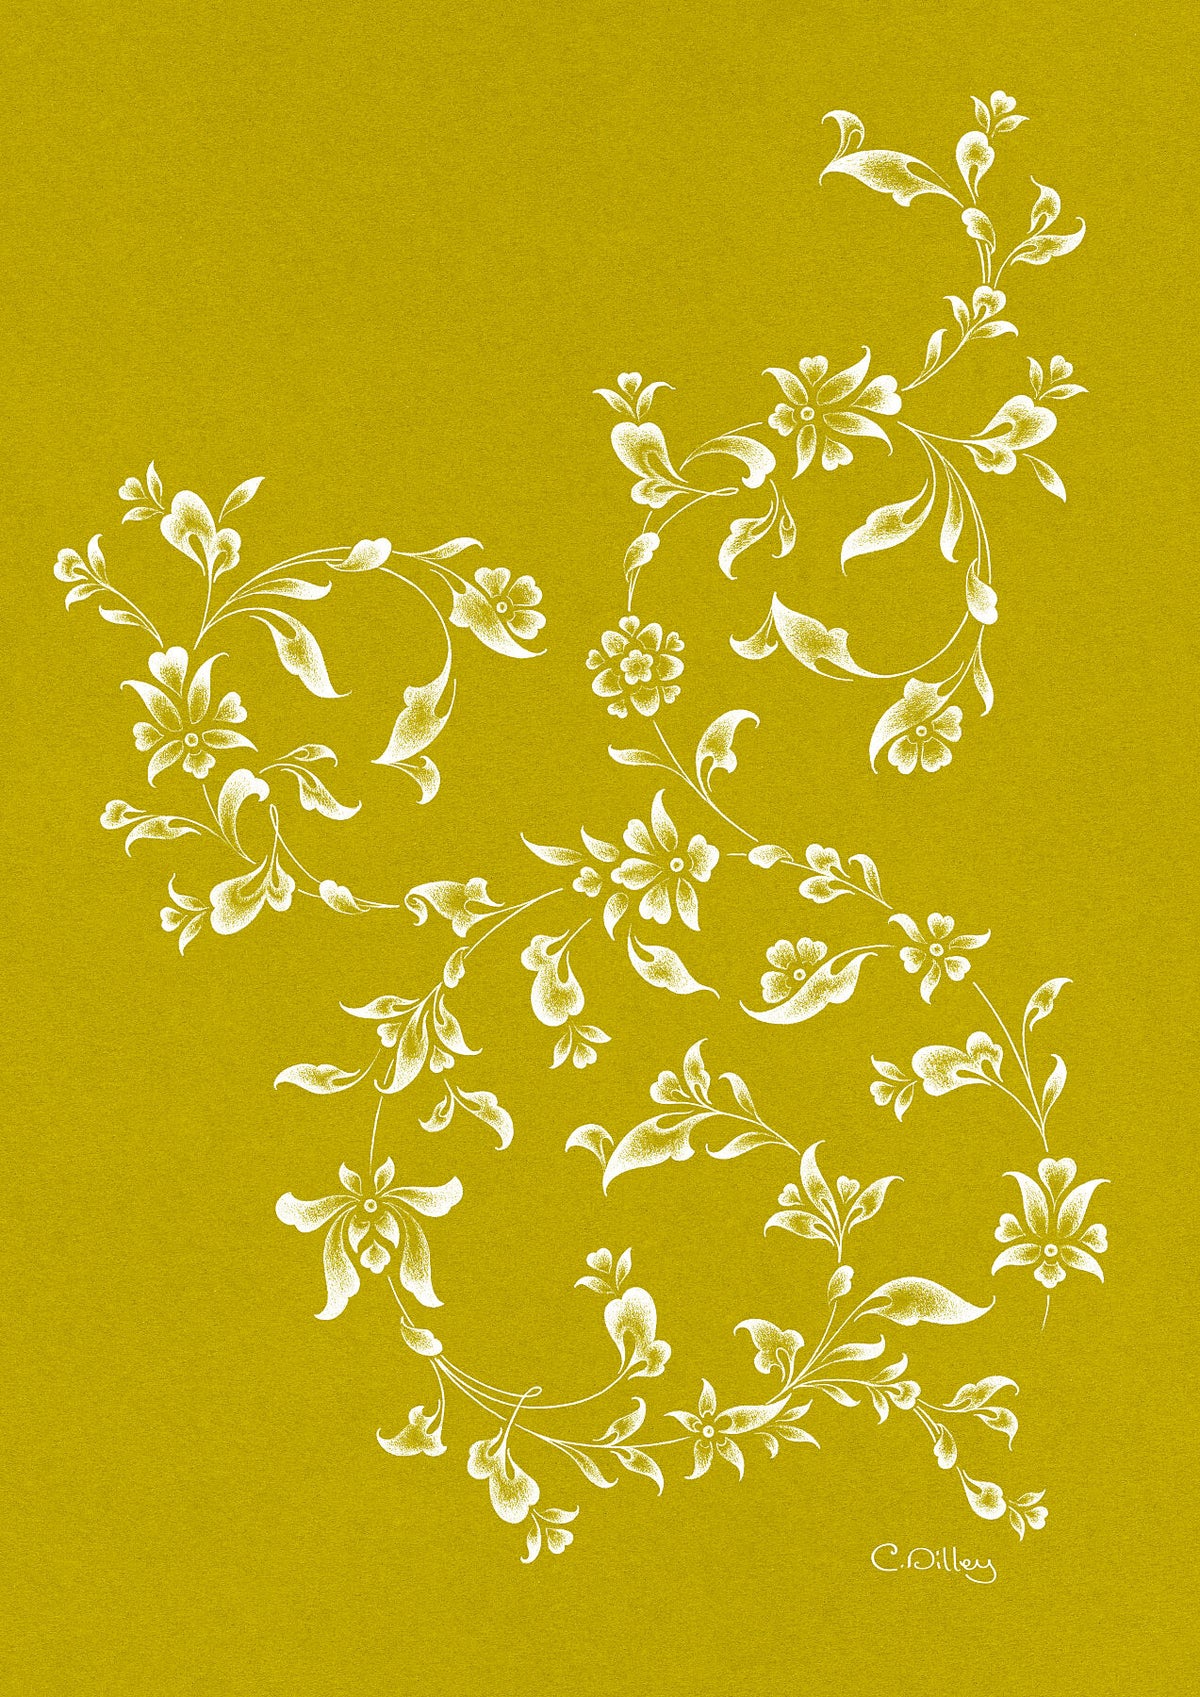 Elegant art print of white, spiralling leaves and floral motifs against a chartreuse background